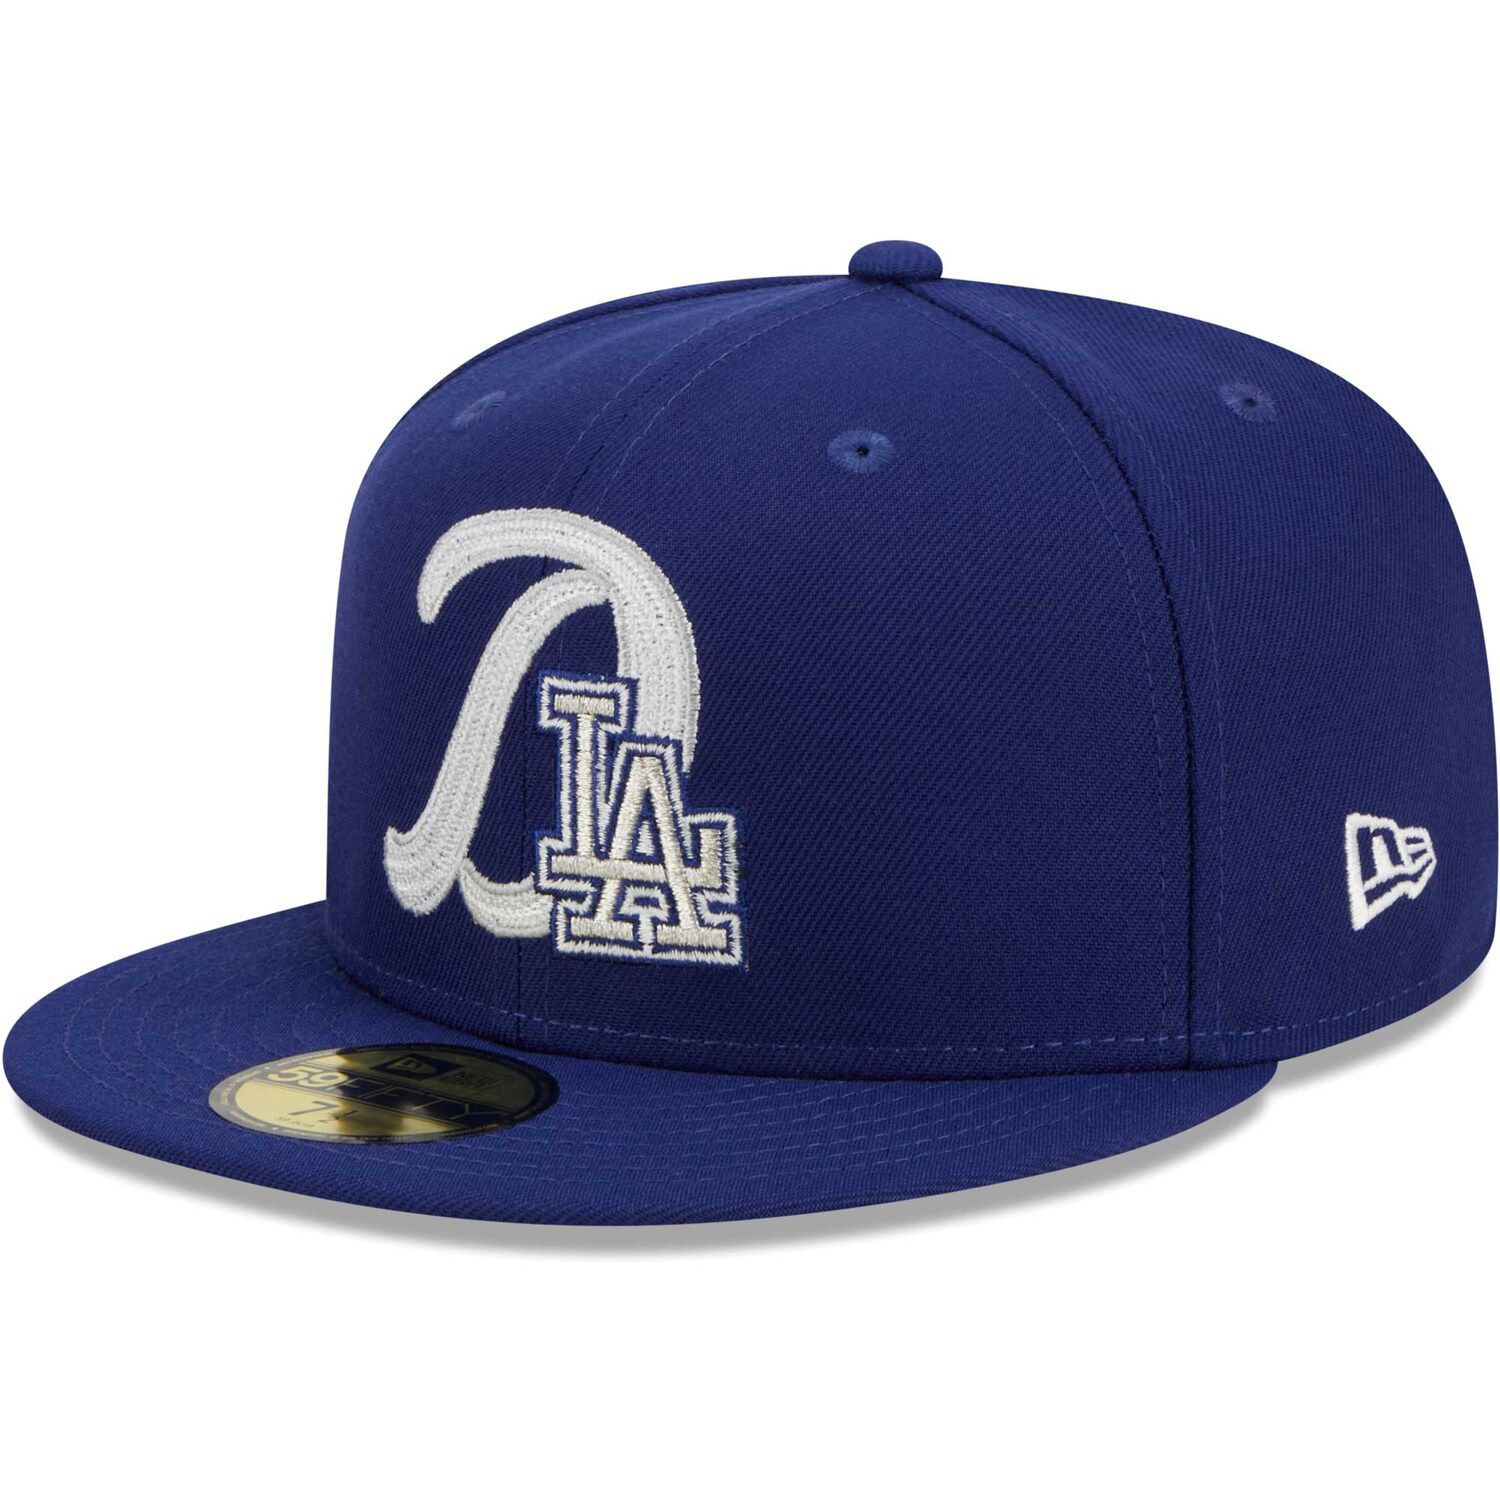 Men’s Los Angeles Dodgers Royal 2020 World Series Champions Arch 9FIFTY Snapback Adjustable Hats